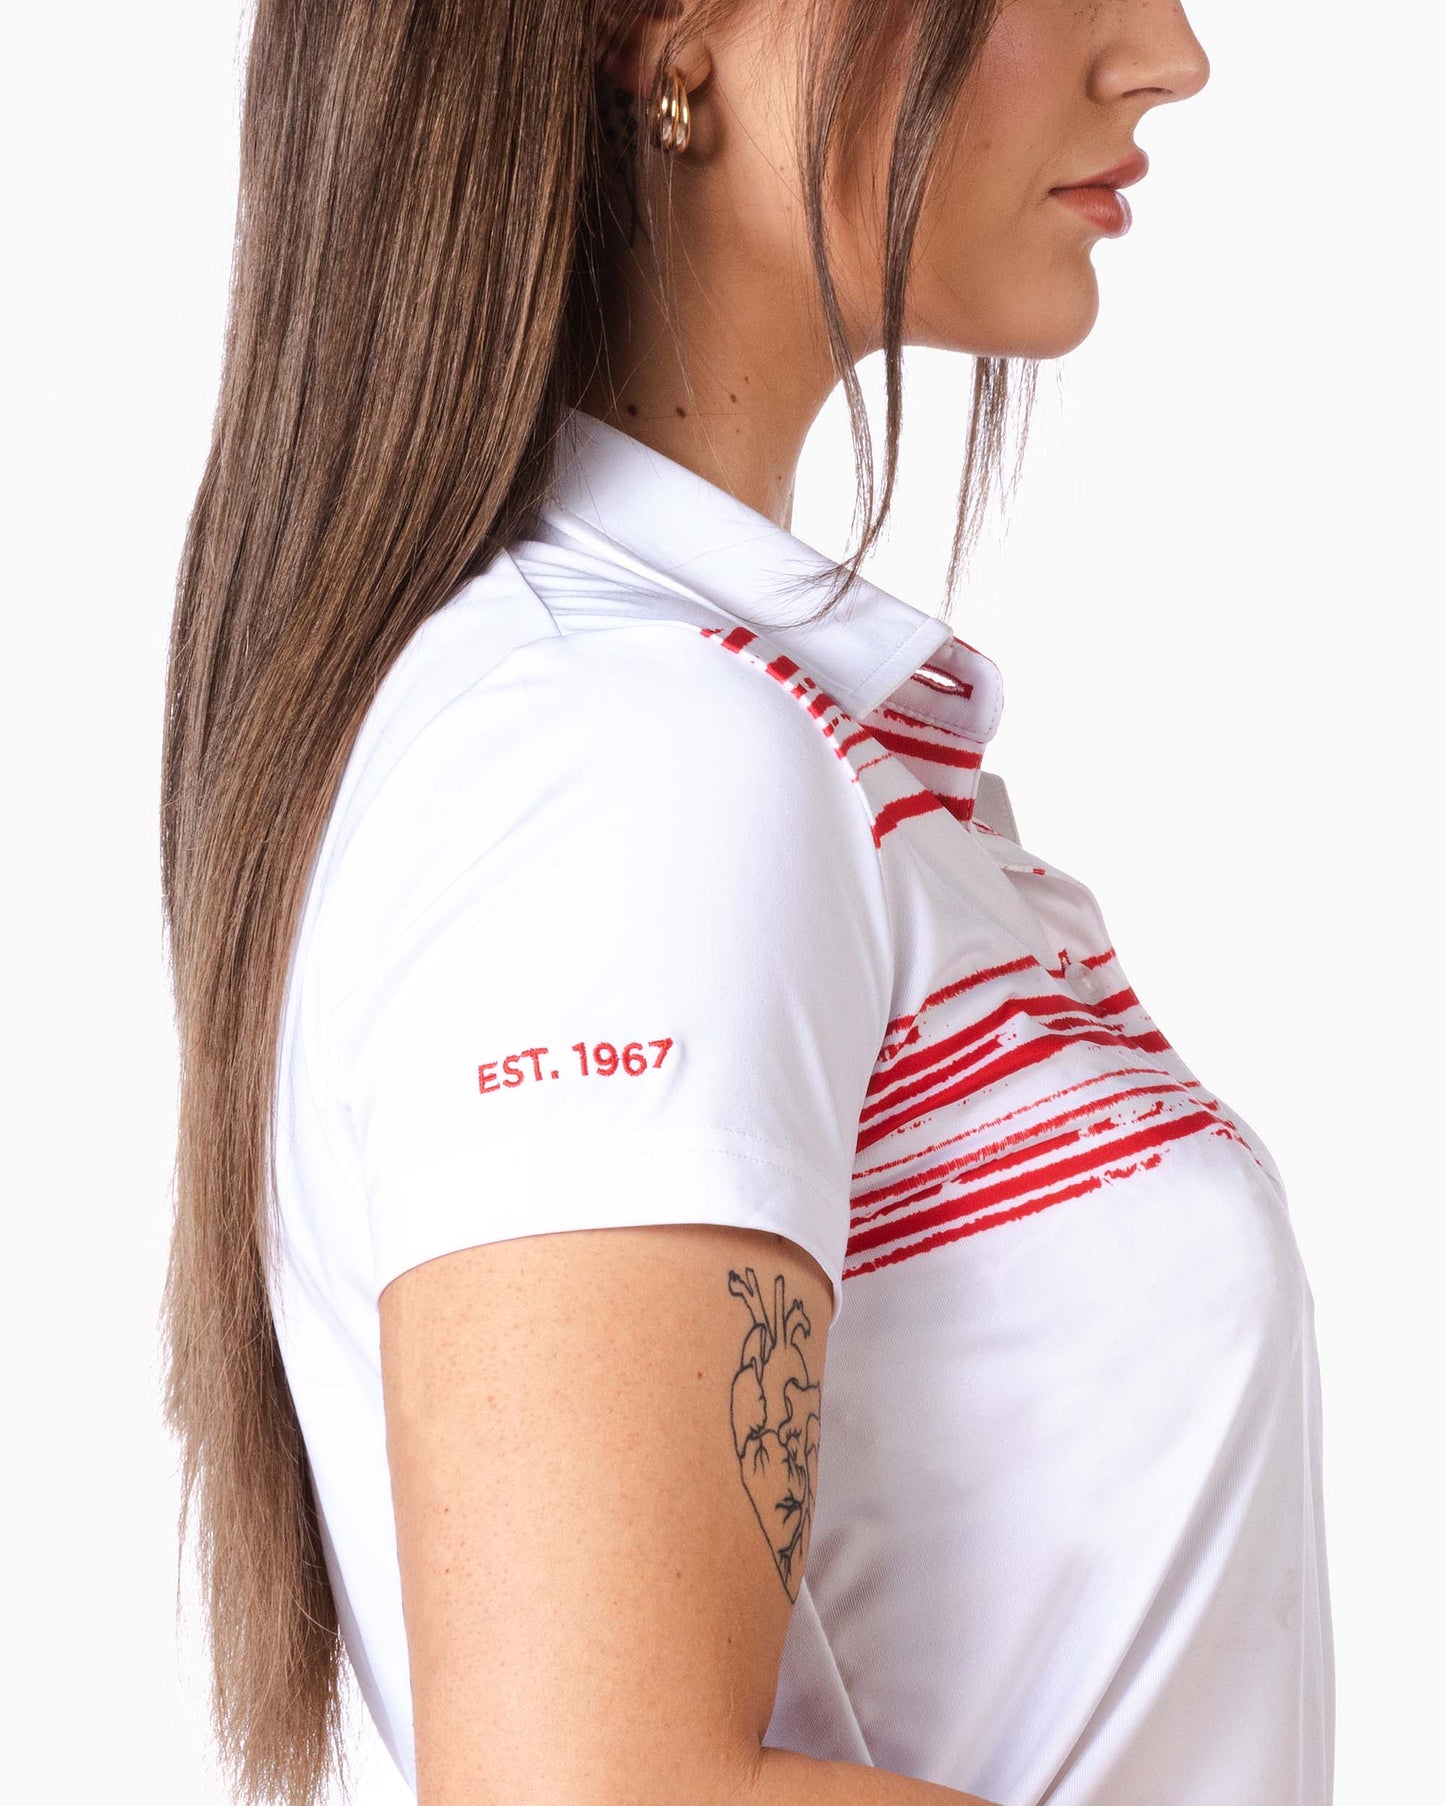 close up of sleeve with embroidered "est. 1967"